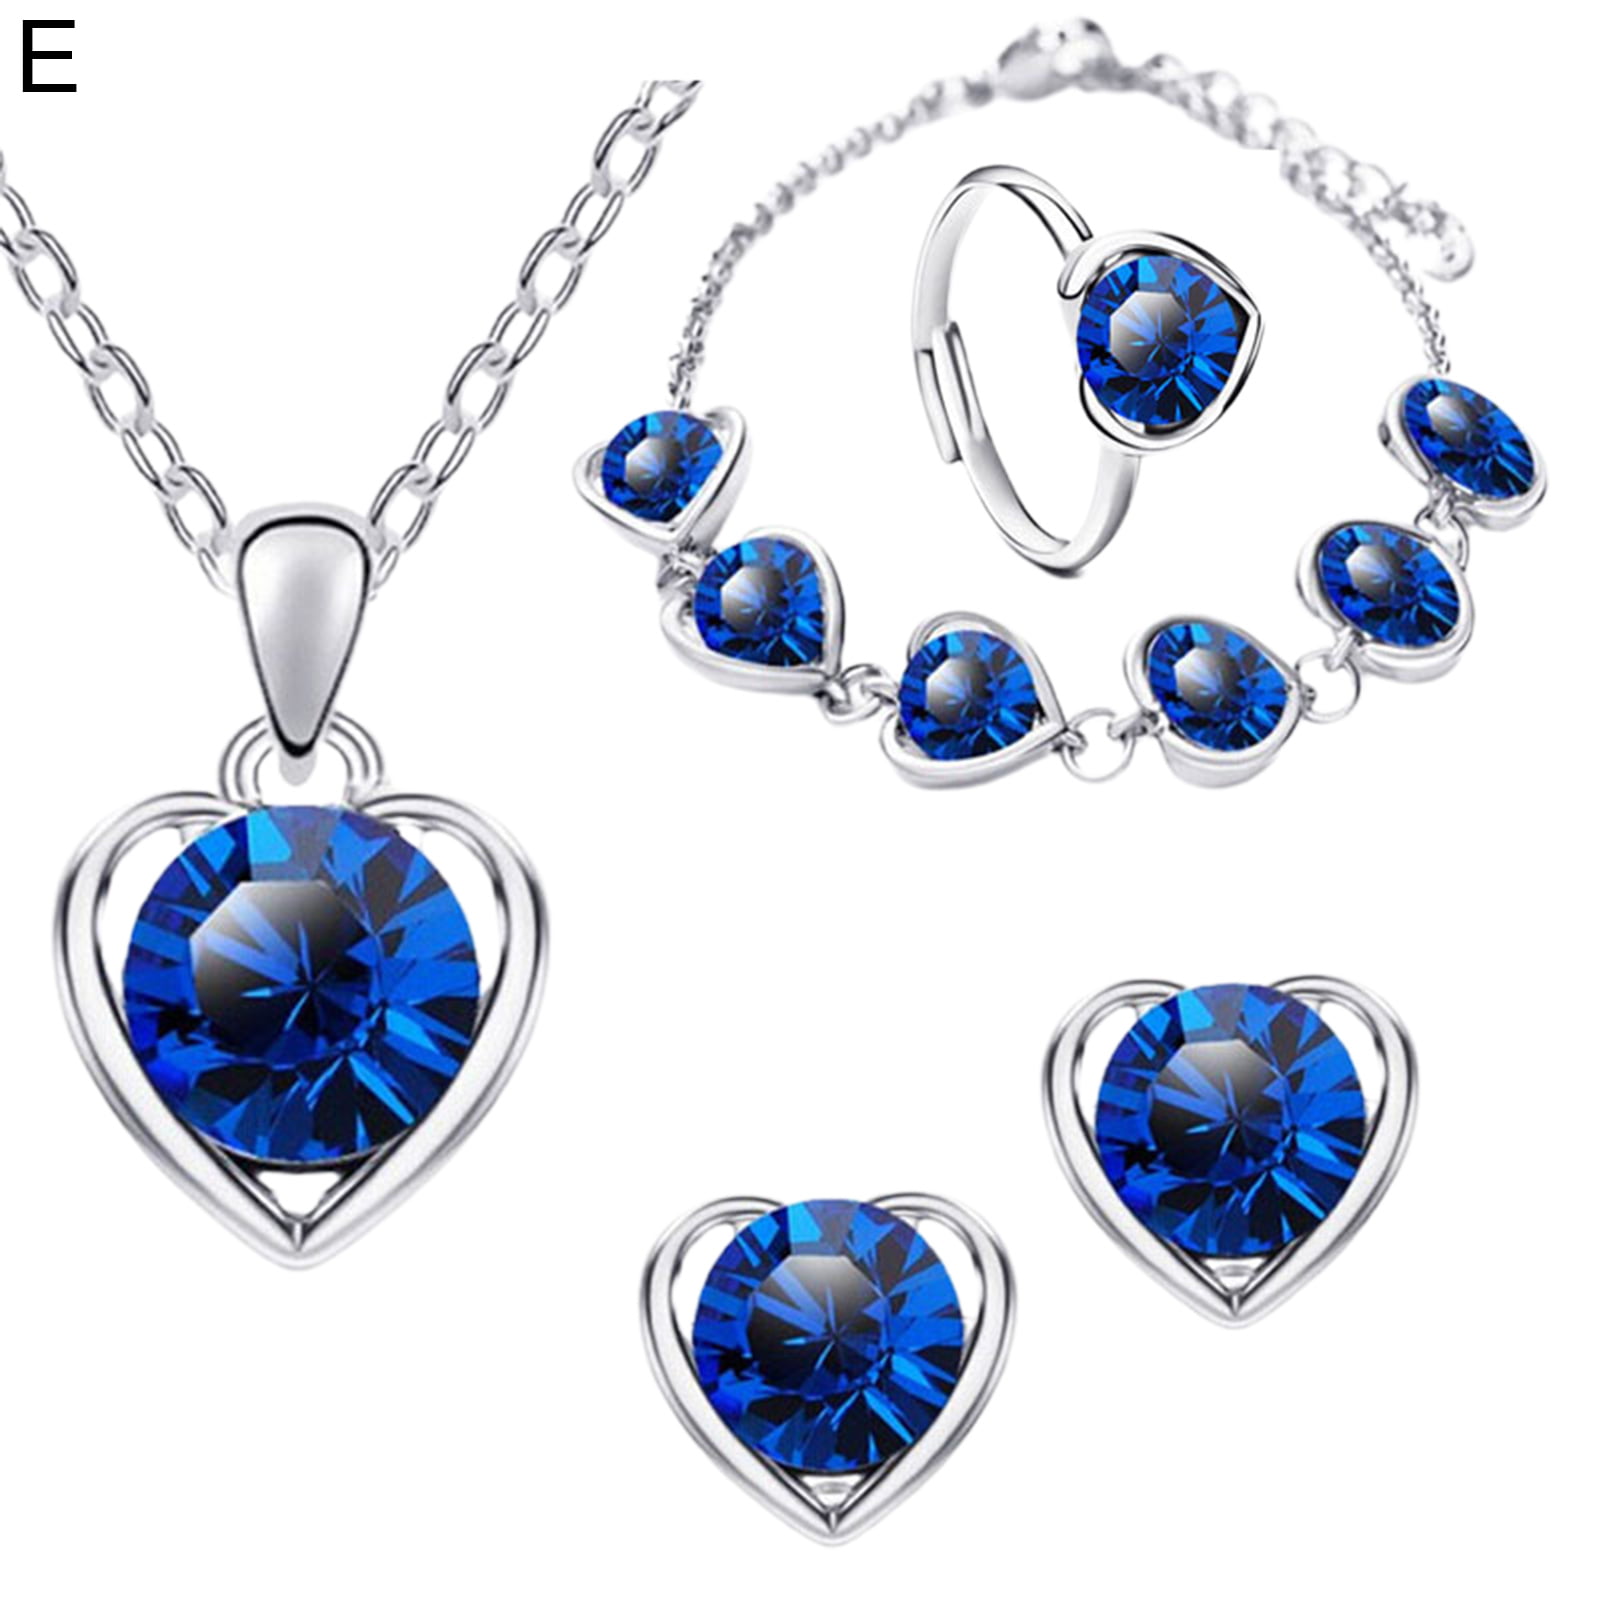 Details about   Diamante hearts chain necklace and earrings set 